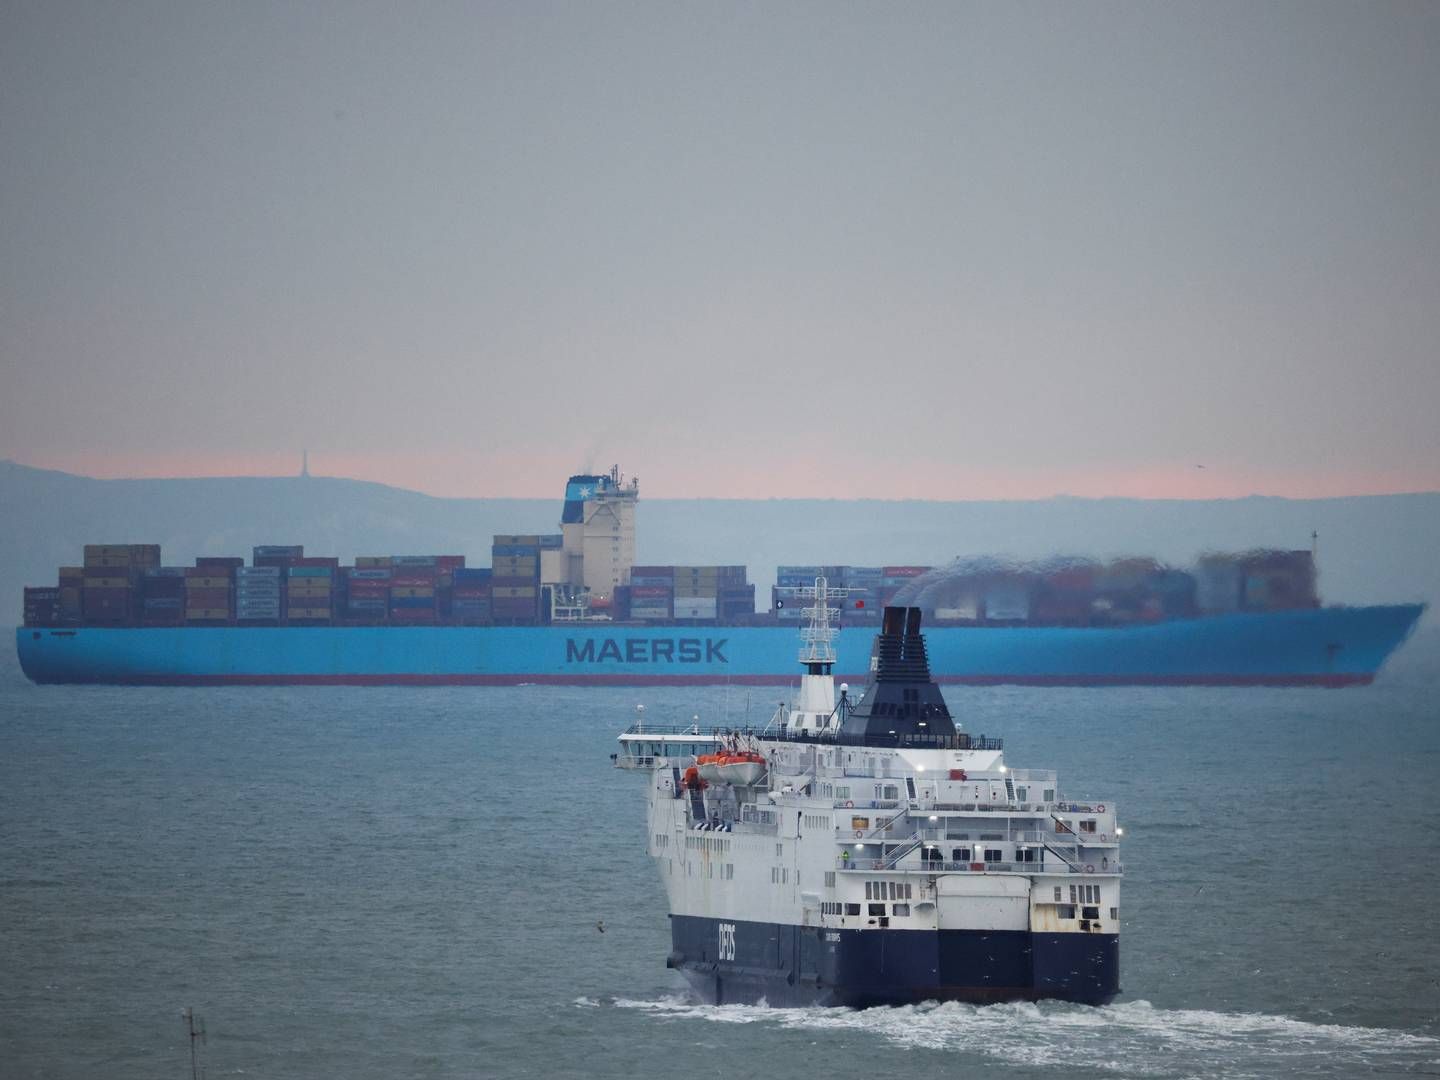 A new political intervention against low pay on ferries on the English Channel could inspire other countries to instate their own demands to carriers, says Danish Shipping. | Foto: John Sibley/Reuters/Ritzau Scanpix